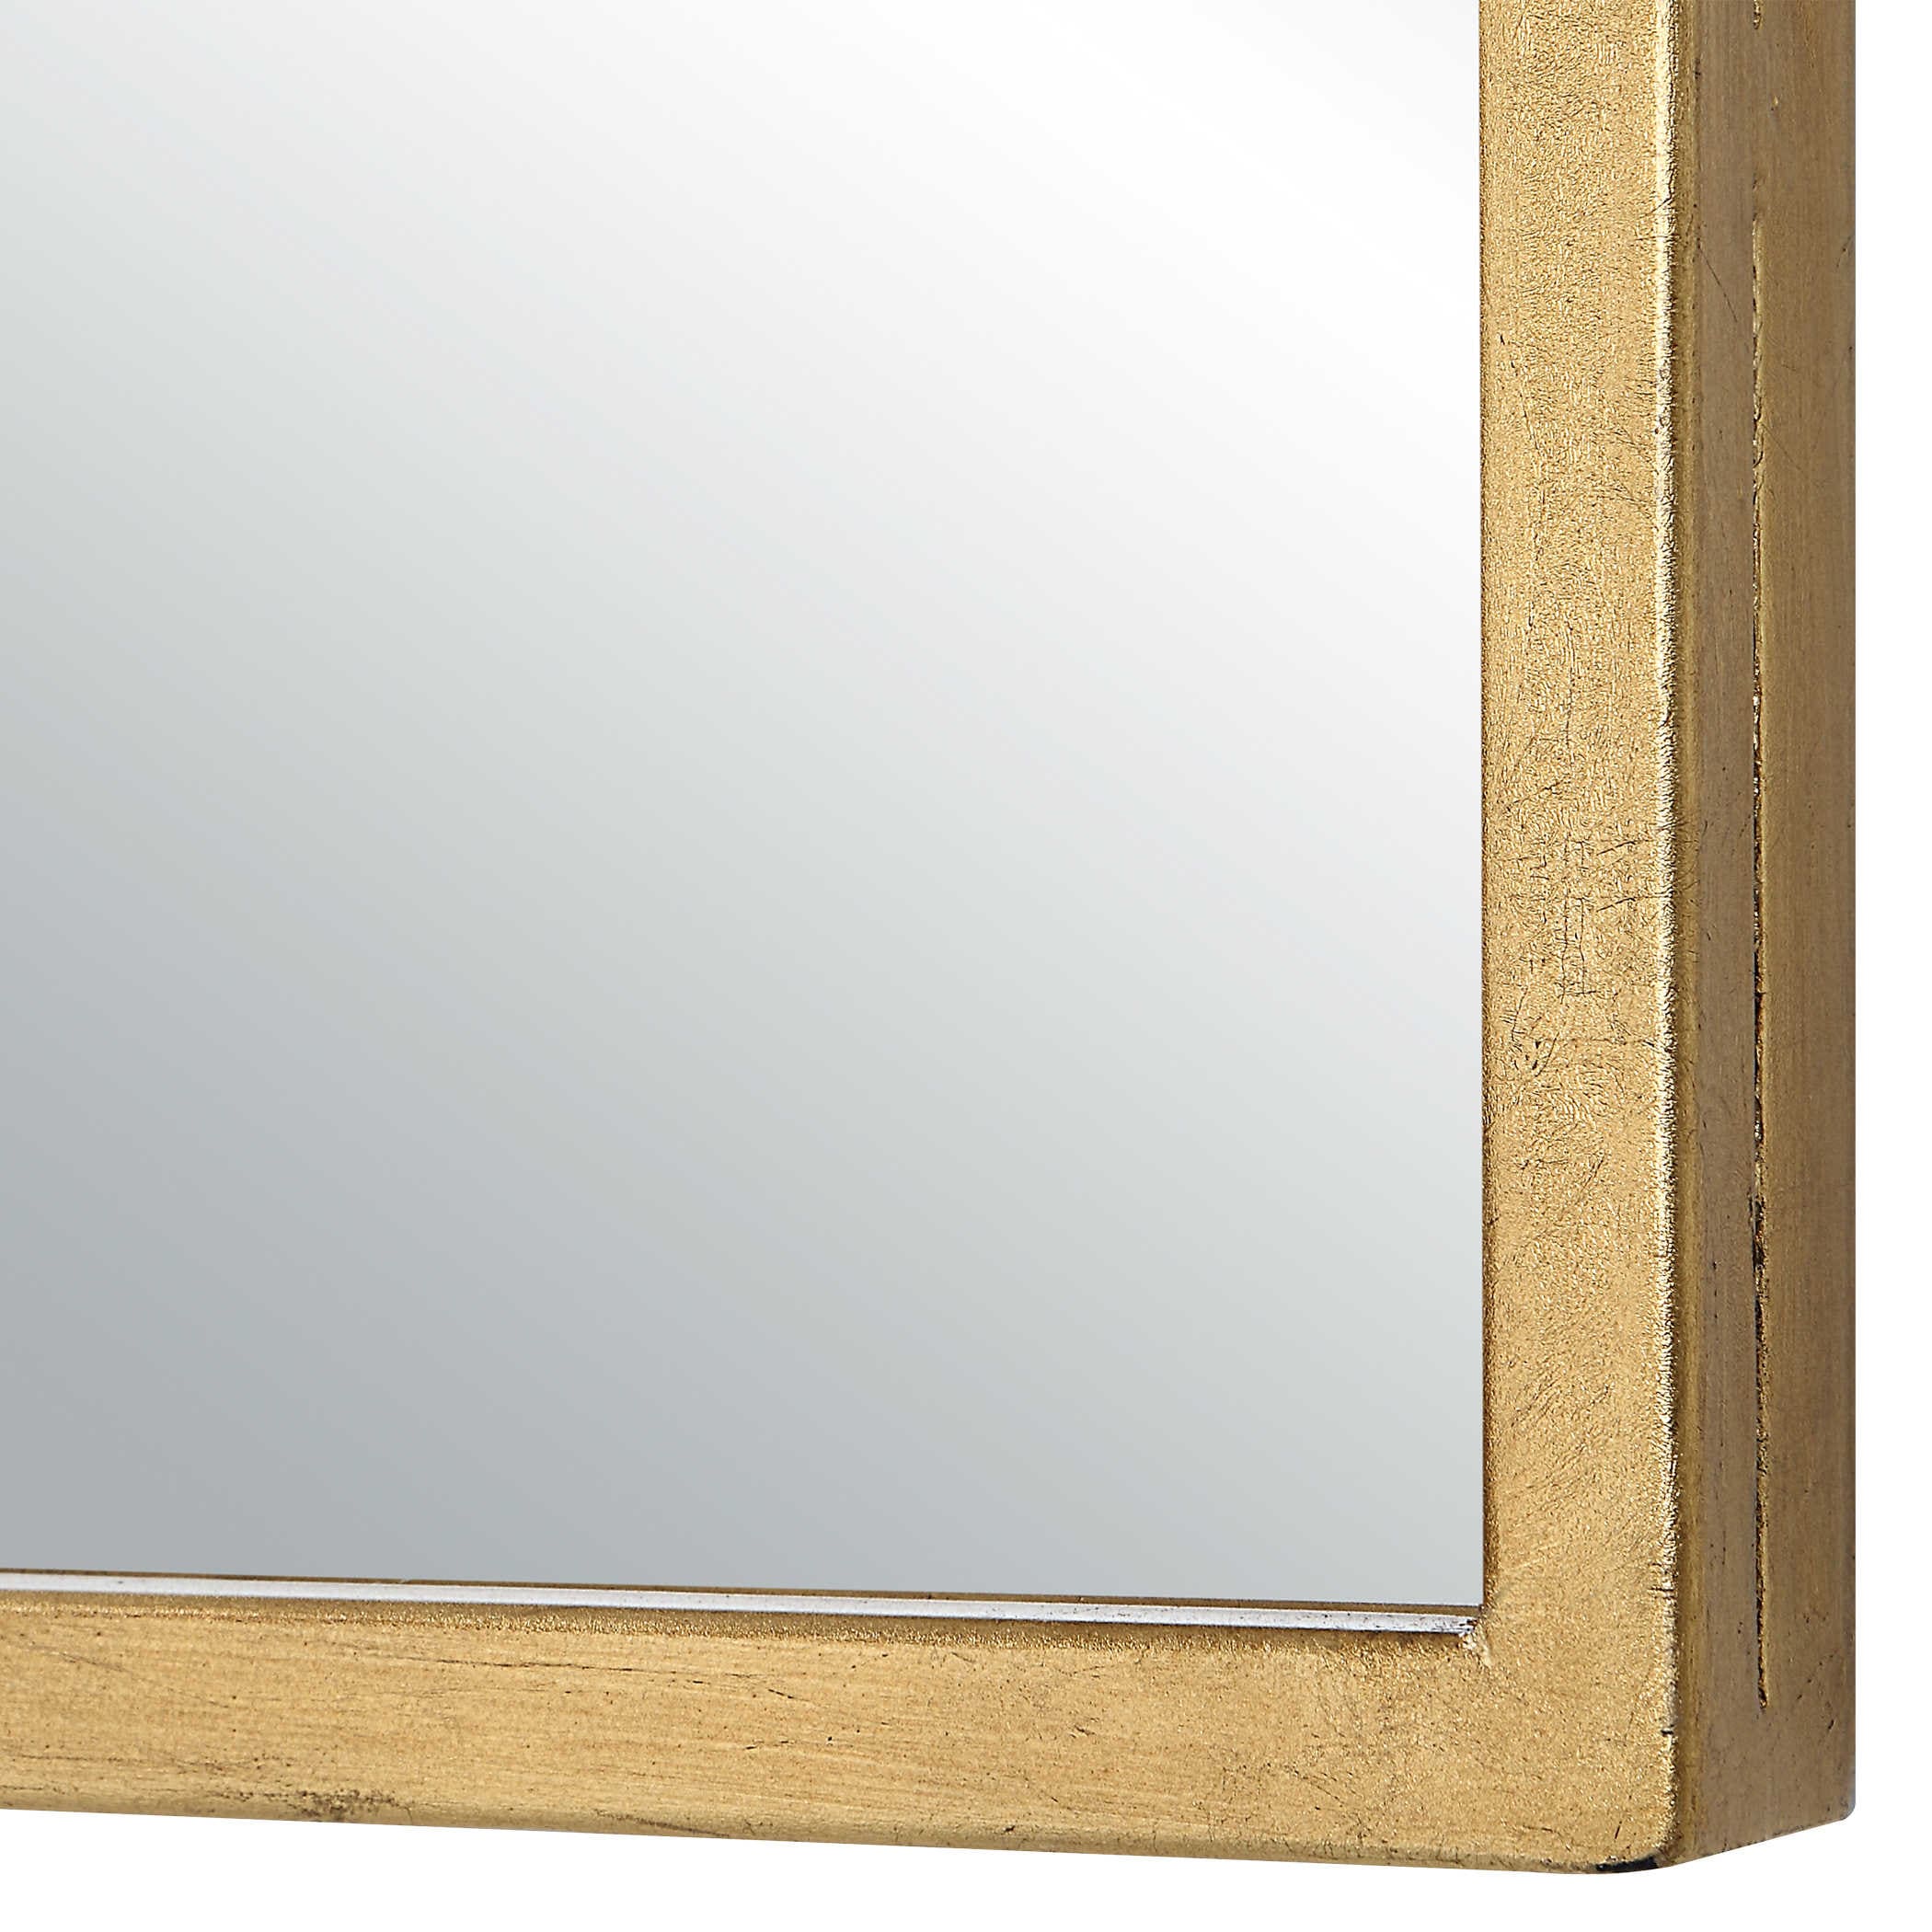 Moroccan Style Gold Mirror Uttermost